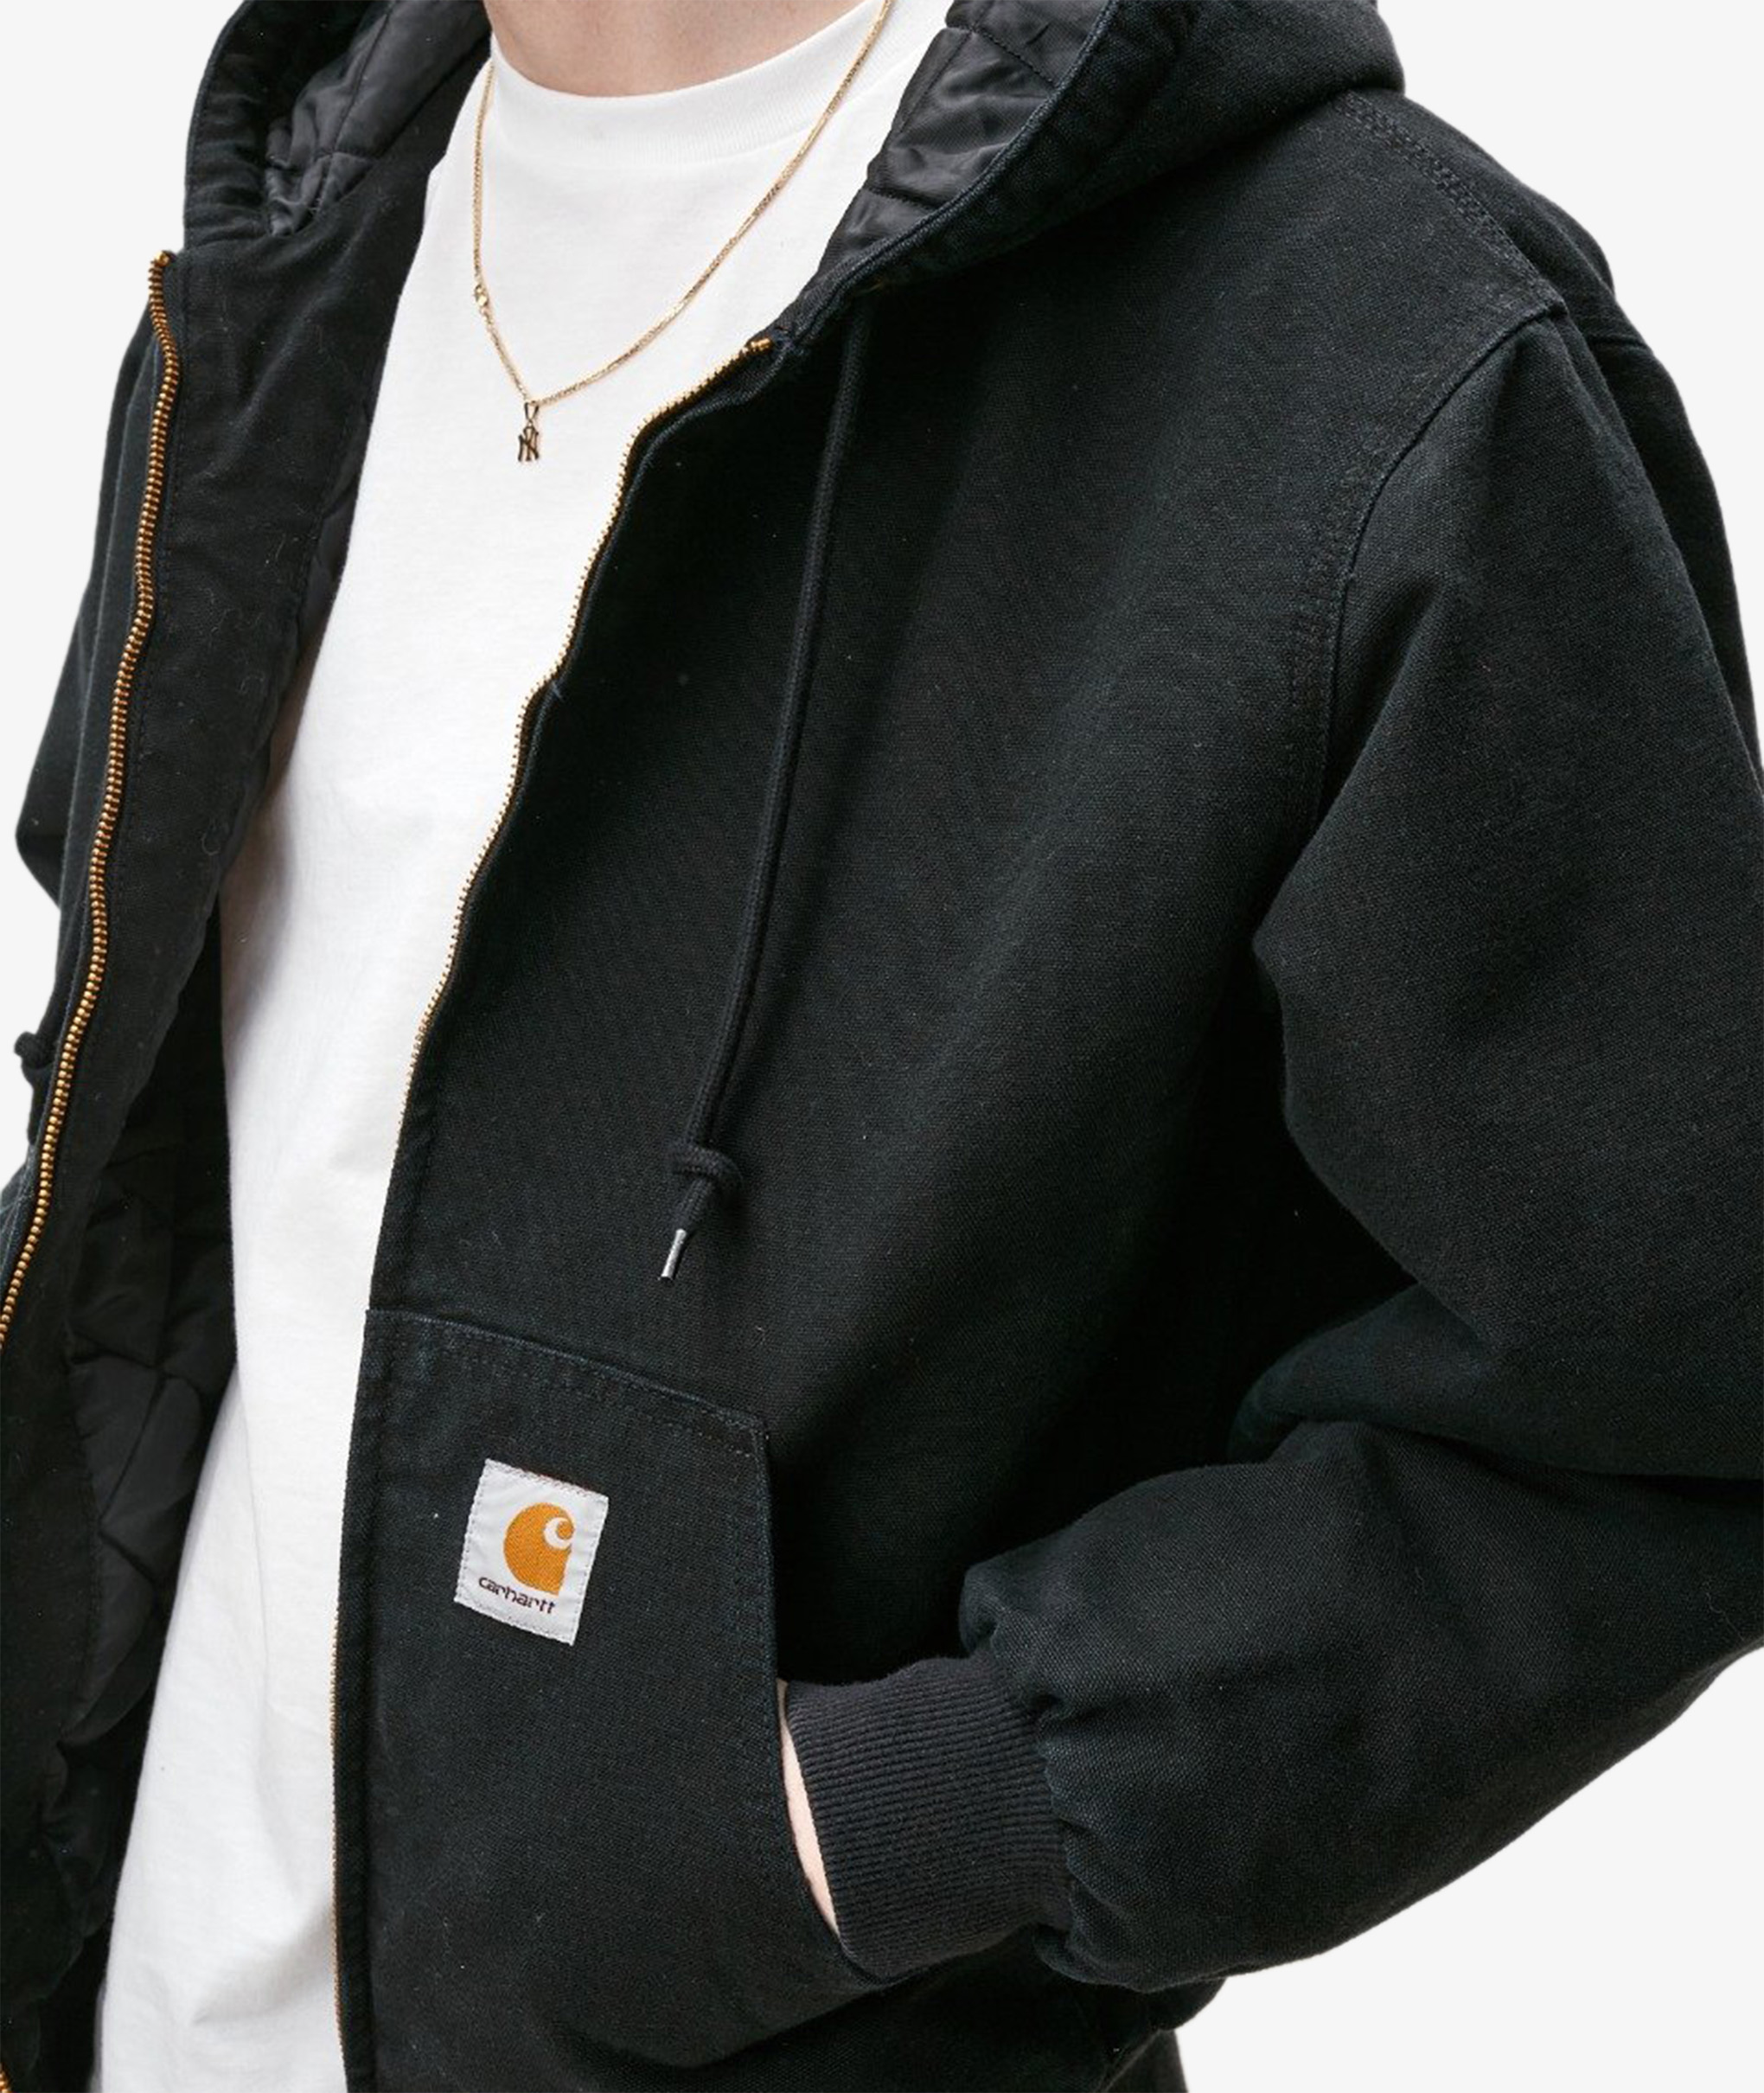 Norse Store  Shipping Worldwide - Carhartt WIP OG Active Jacket - Black  Aged